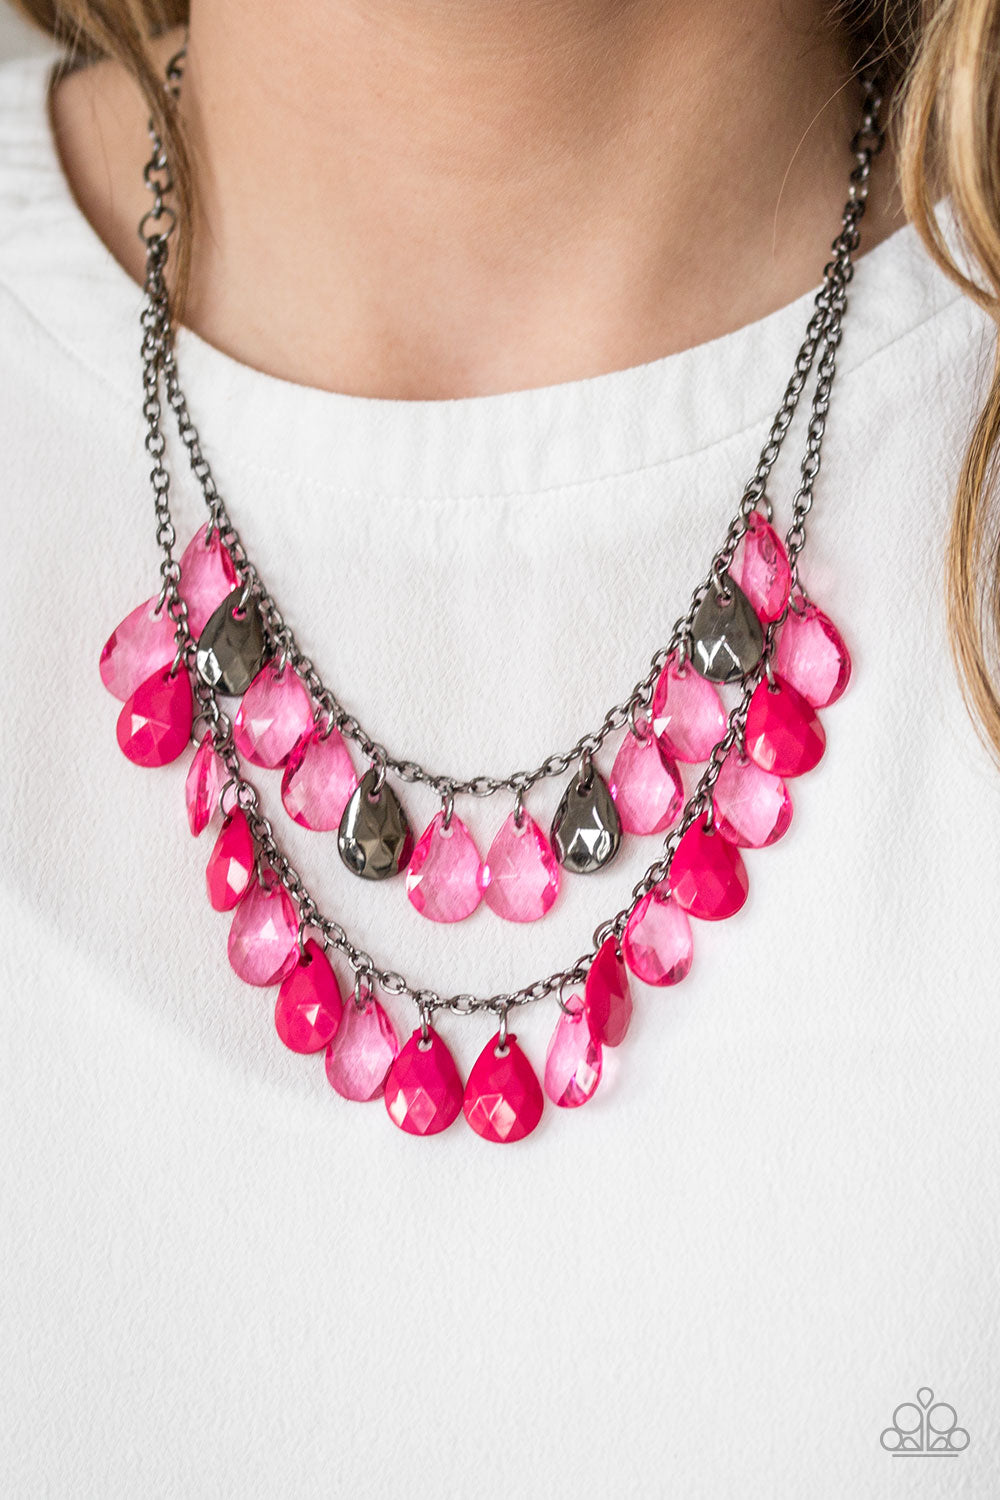 Paparazzi Accessories Storm Warning - Pink Necklace & Earrings 